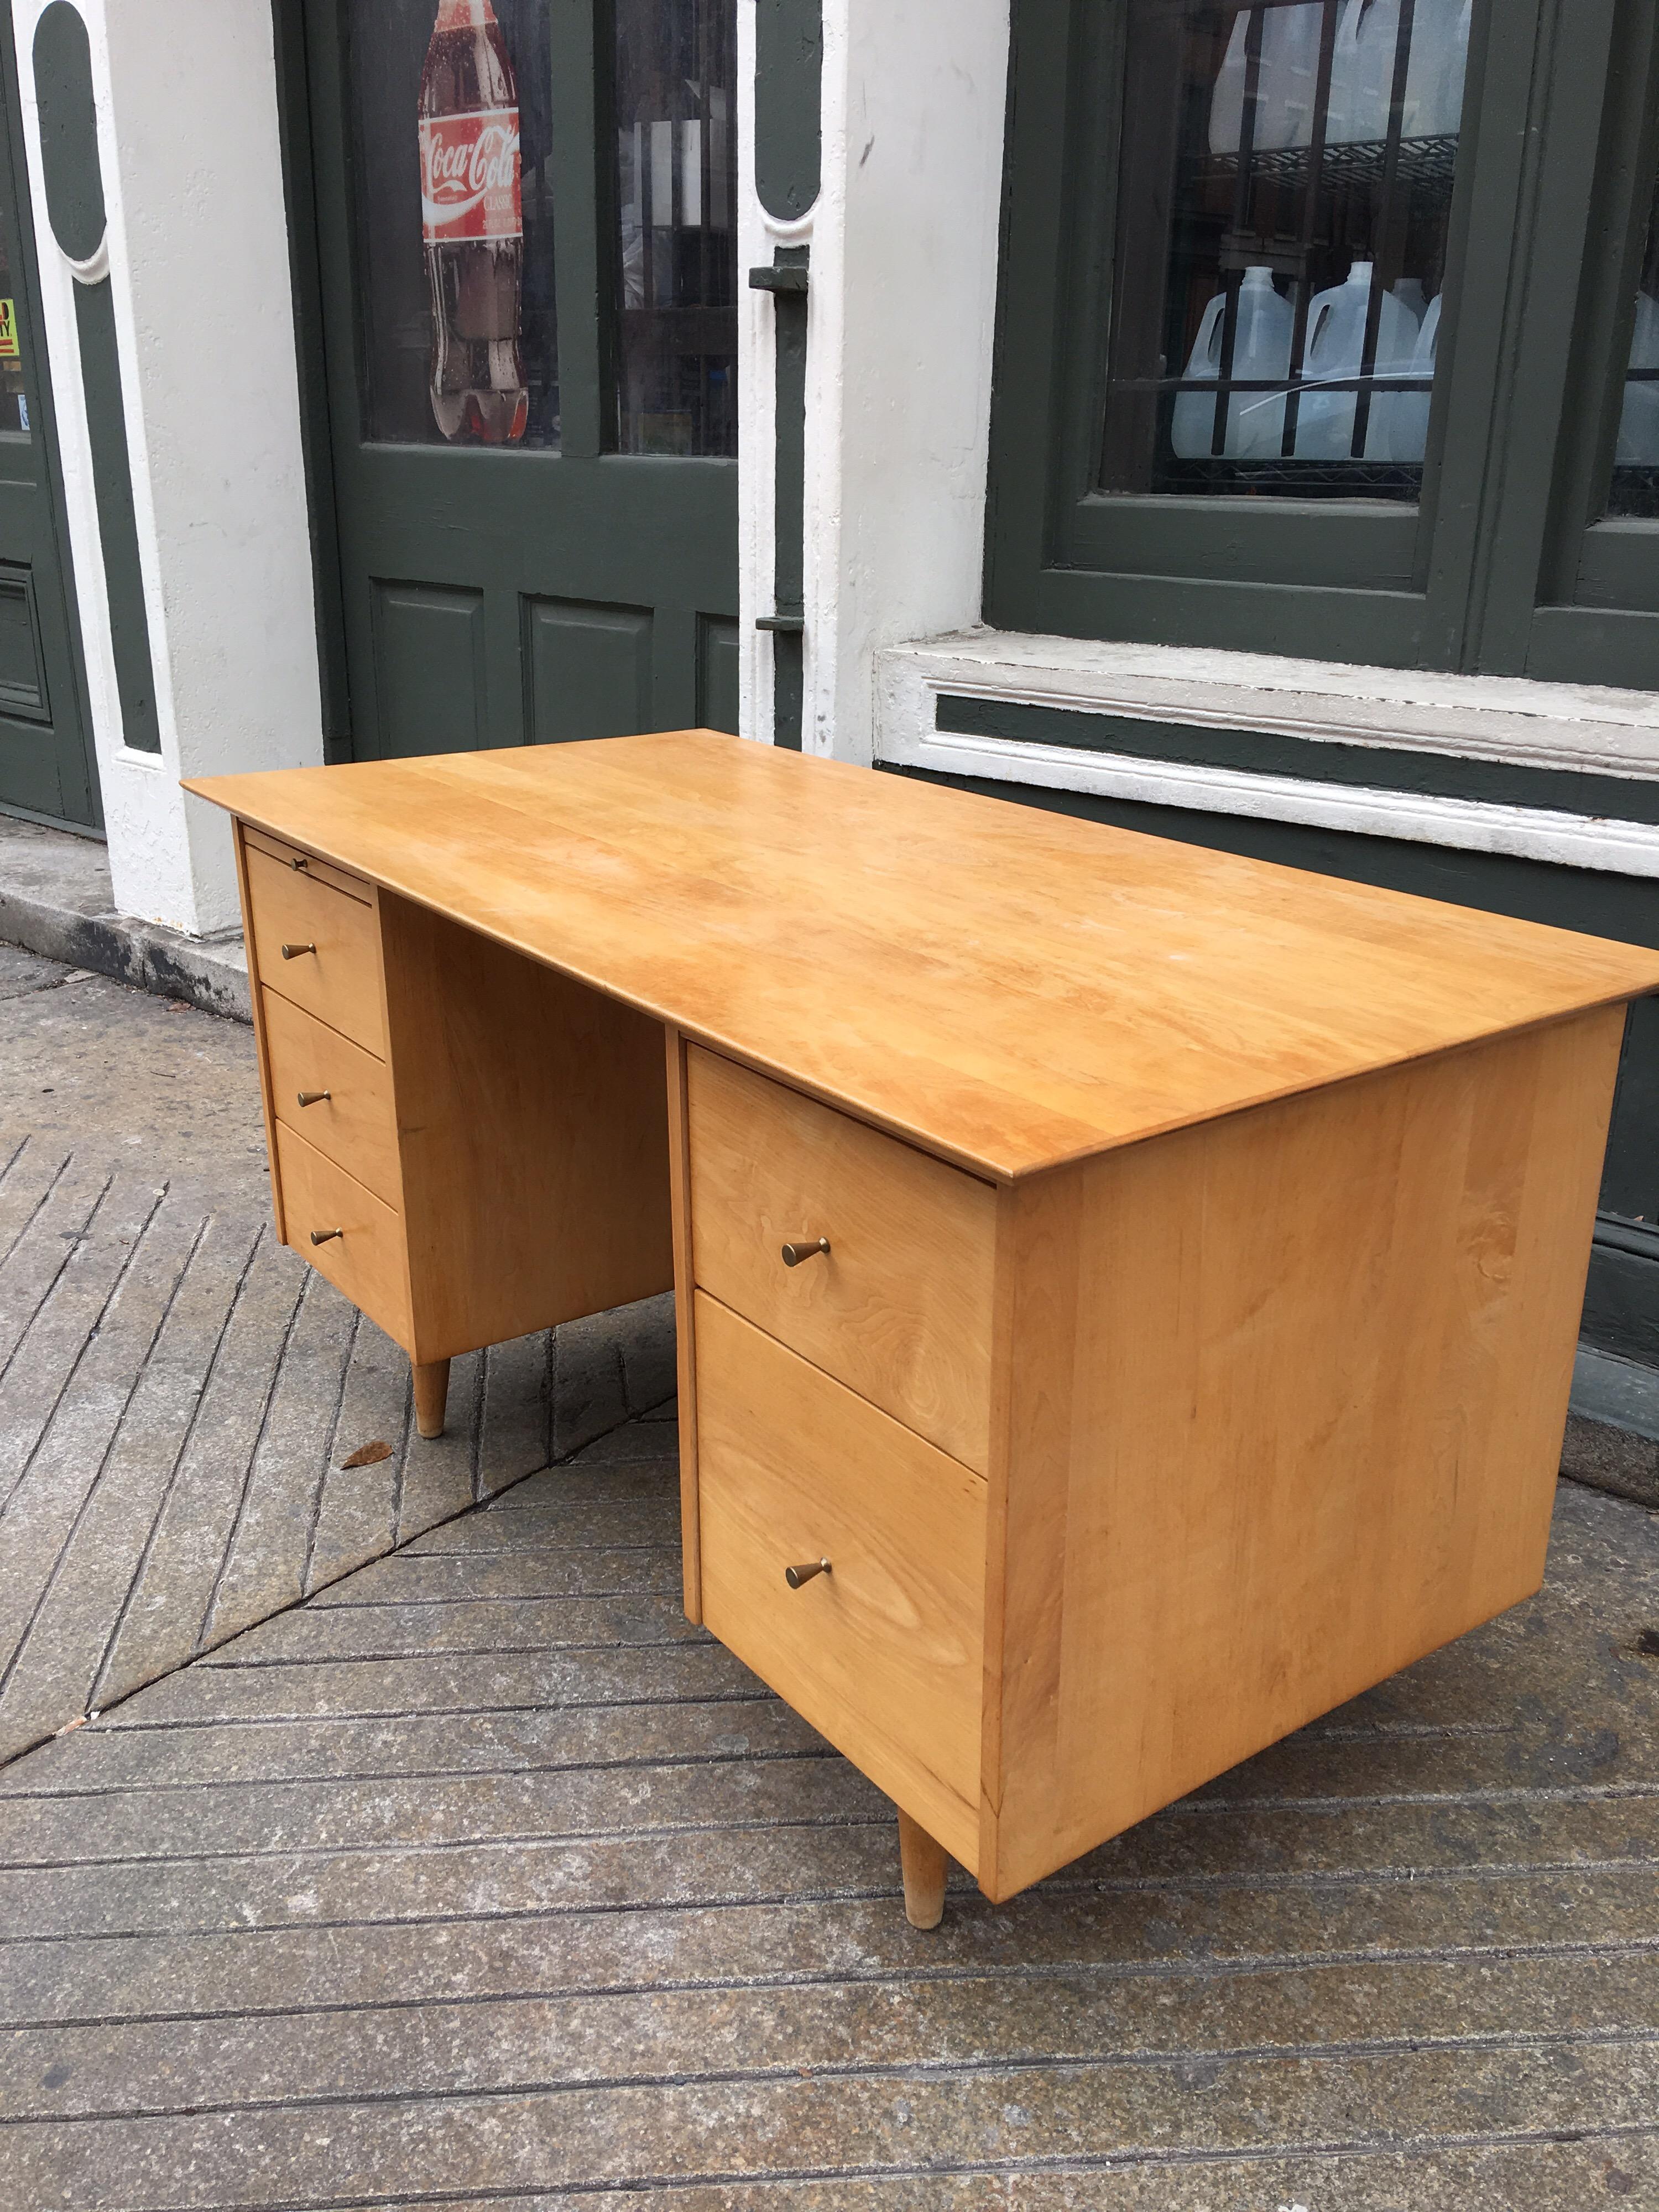 Paul McCobb double pedestal desk with pullout / pull-out work surface. Original blond finish, top shows a little wear, but overall very presentable! Desk is finished on all sides so it would look great away from a wall! Second pedestal gives plenty